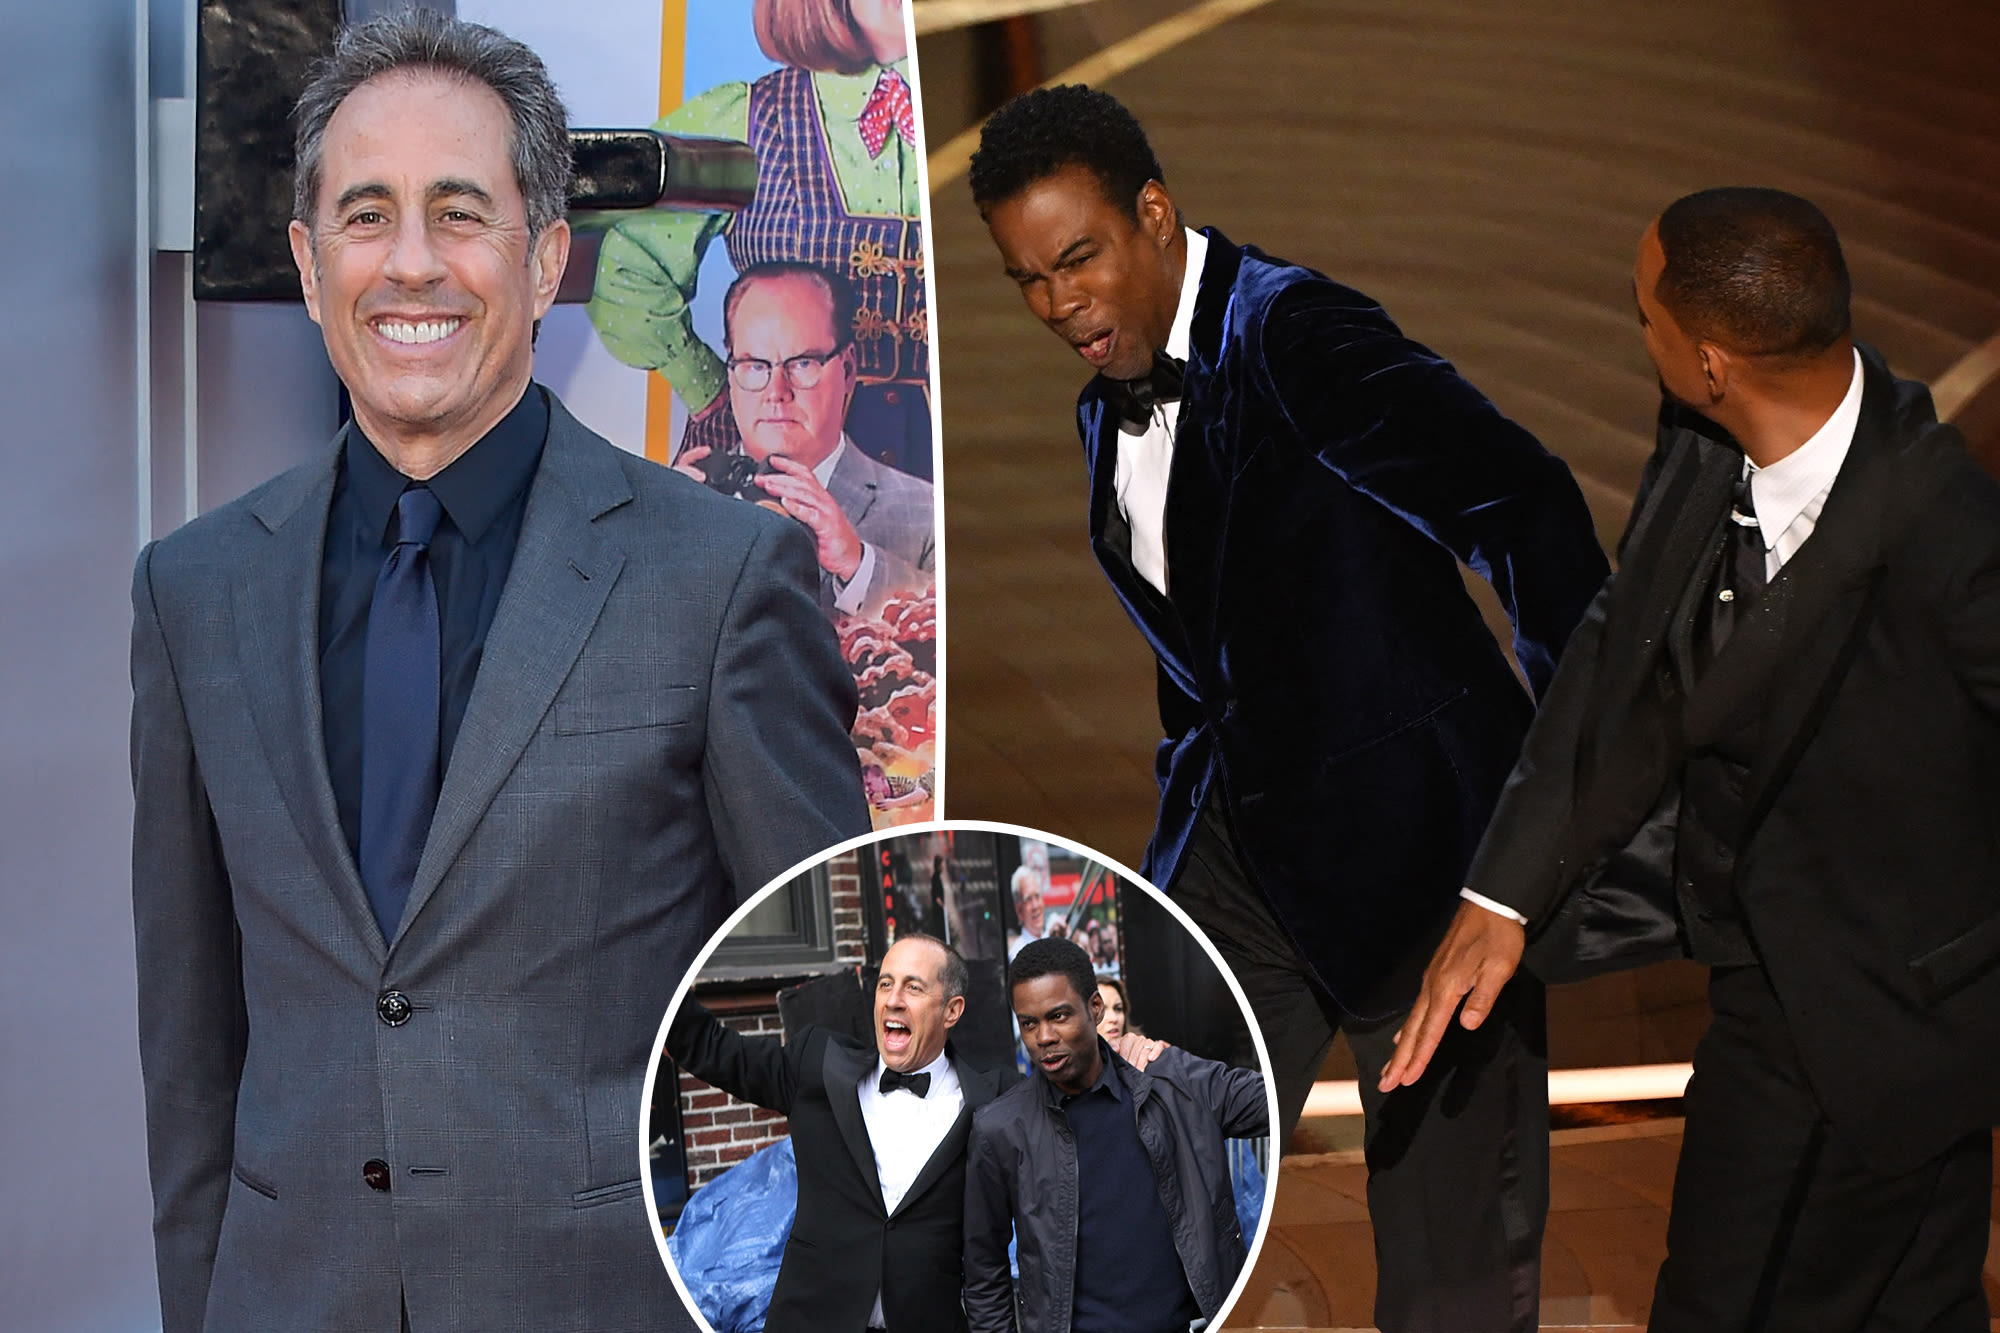 Jerry Seinfeld asked Chris Rock to parody the Will Smith Oscars slap: He was too ‘shook’ still